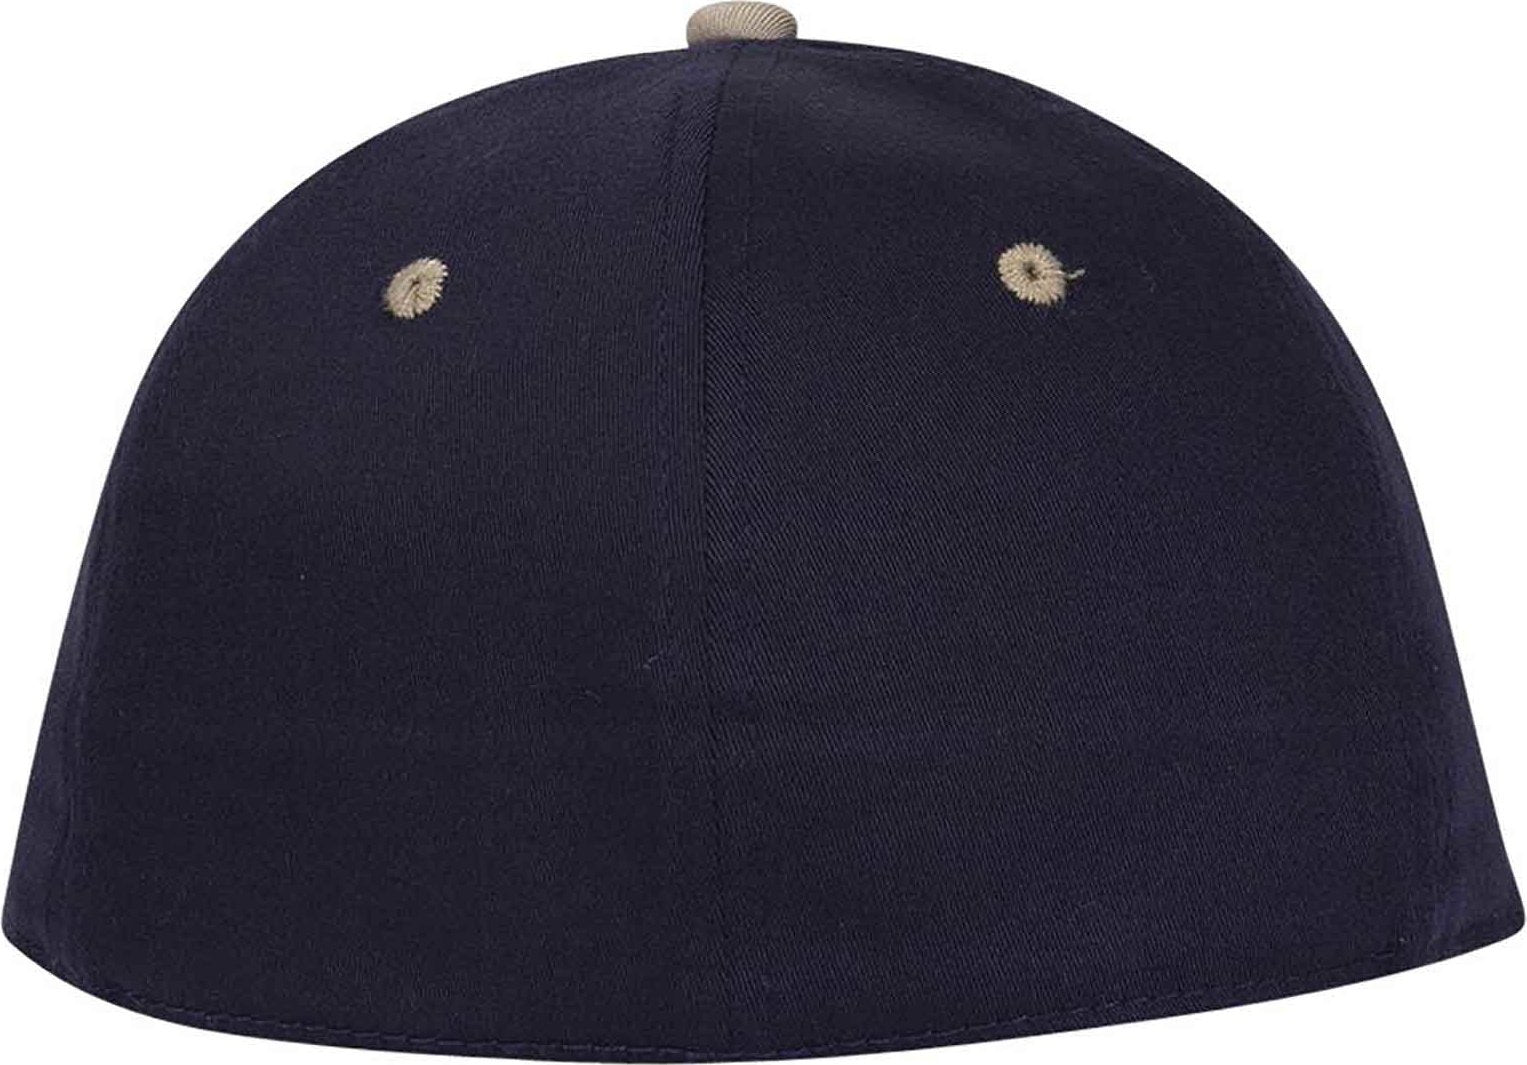 OTTO 12-267 Stretchable Deluxe Brushed Cotton Twill Sandwich Visor Low Profile Pro Style Cap S/M - Khaki Navy Navy - HIT a Double - 1